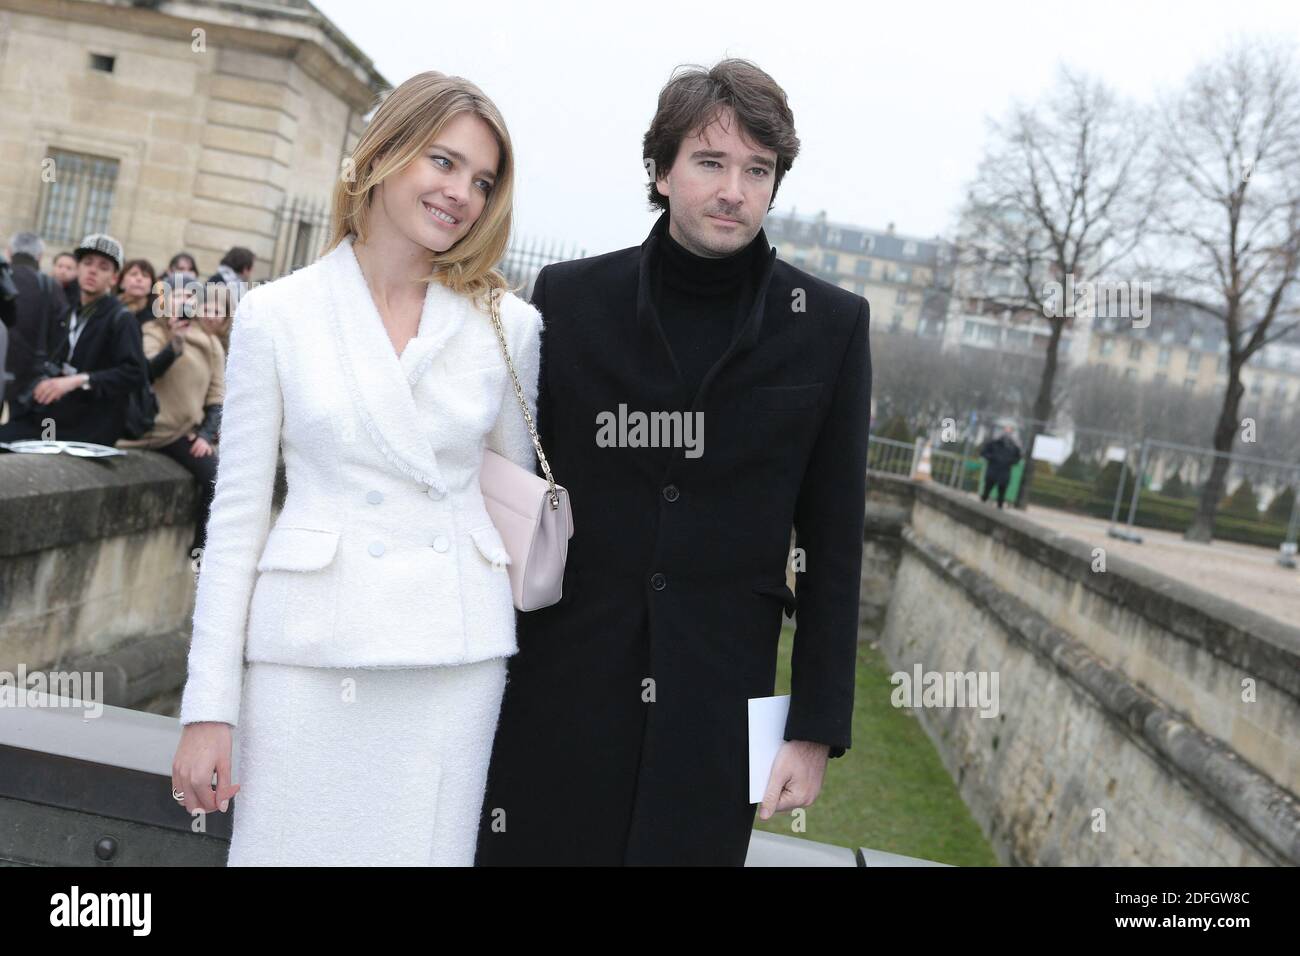 File photo - Natalia Vodianova and Antoine Arnault arrive to Louis Vuitton  Fall/Winter 2015-2016 Ready-To-Wear collection show held at the Fondation  Louis Vuitton in Paris, France, on March 11, 2015. Antoine Arnault